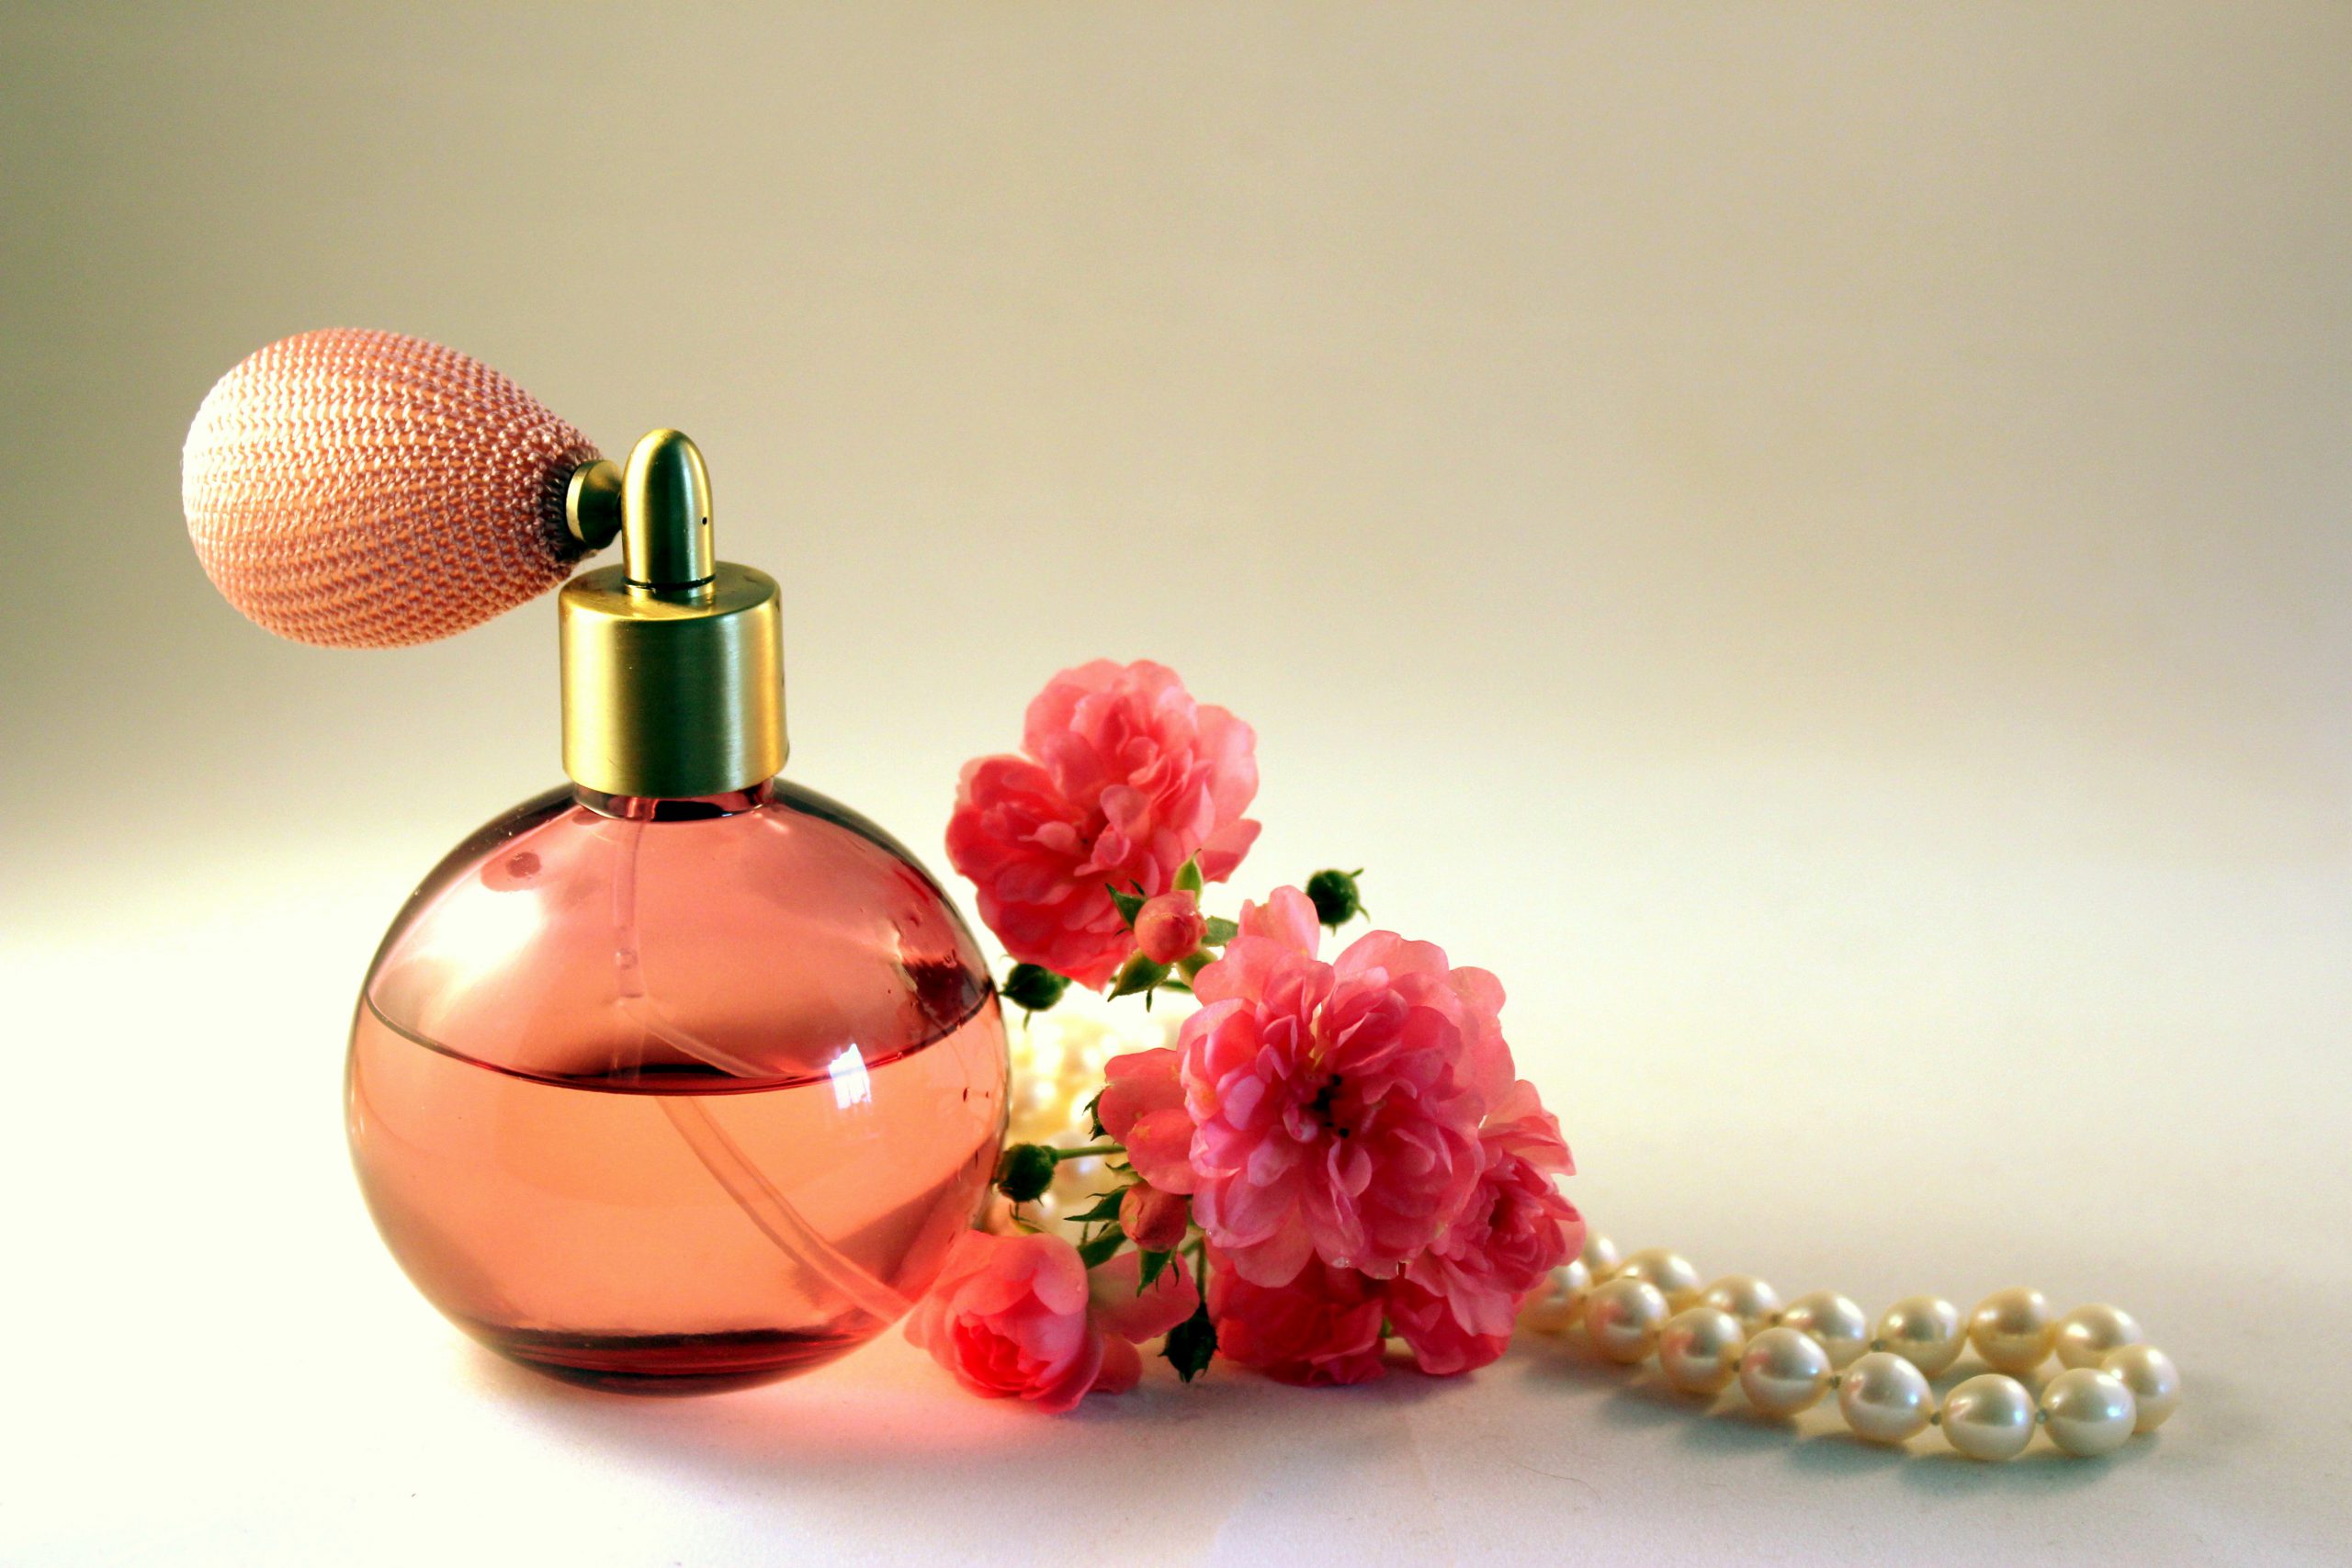 A pink bottle of perfume, next to roses. Not brand specific.